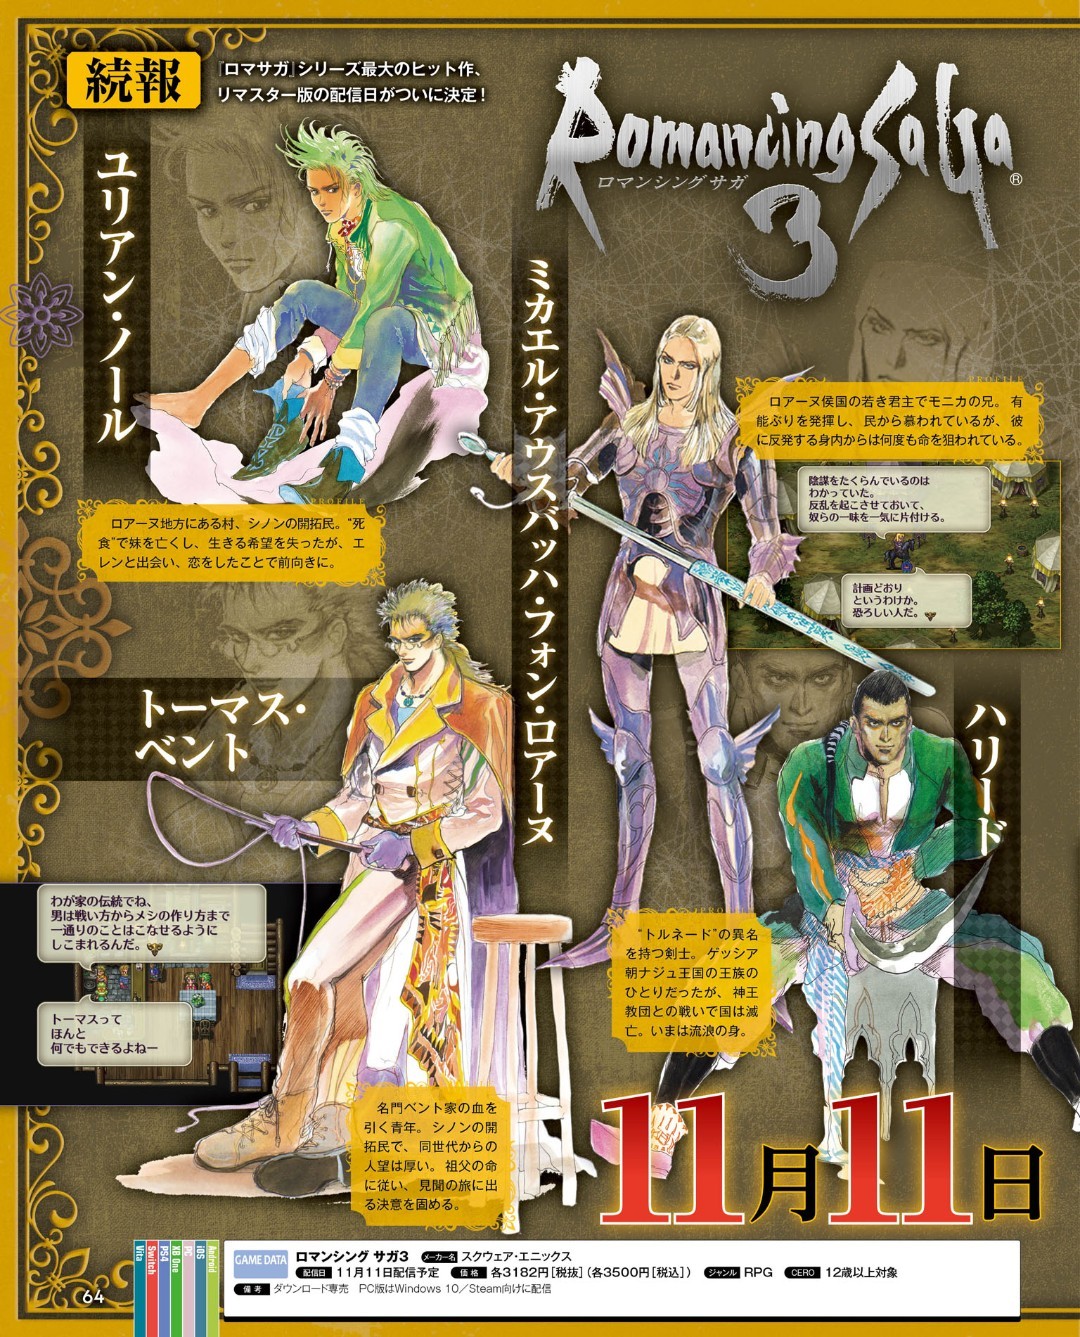 Record of Grancrest War Is Getting A Tactical RPG On PS4, To Release In  Japan On June 14 - Siliconera